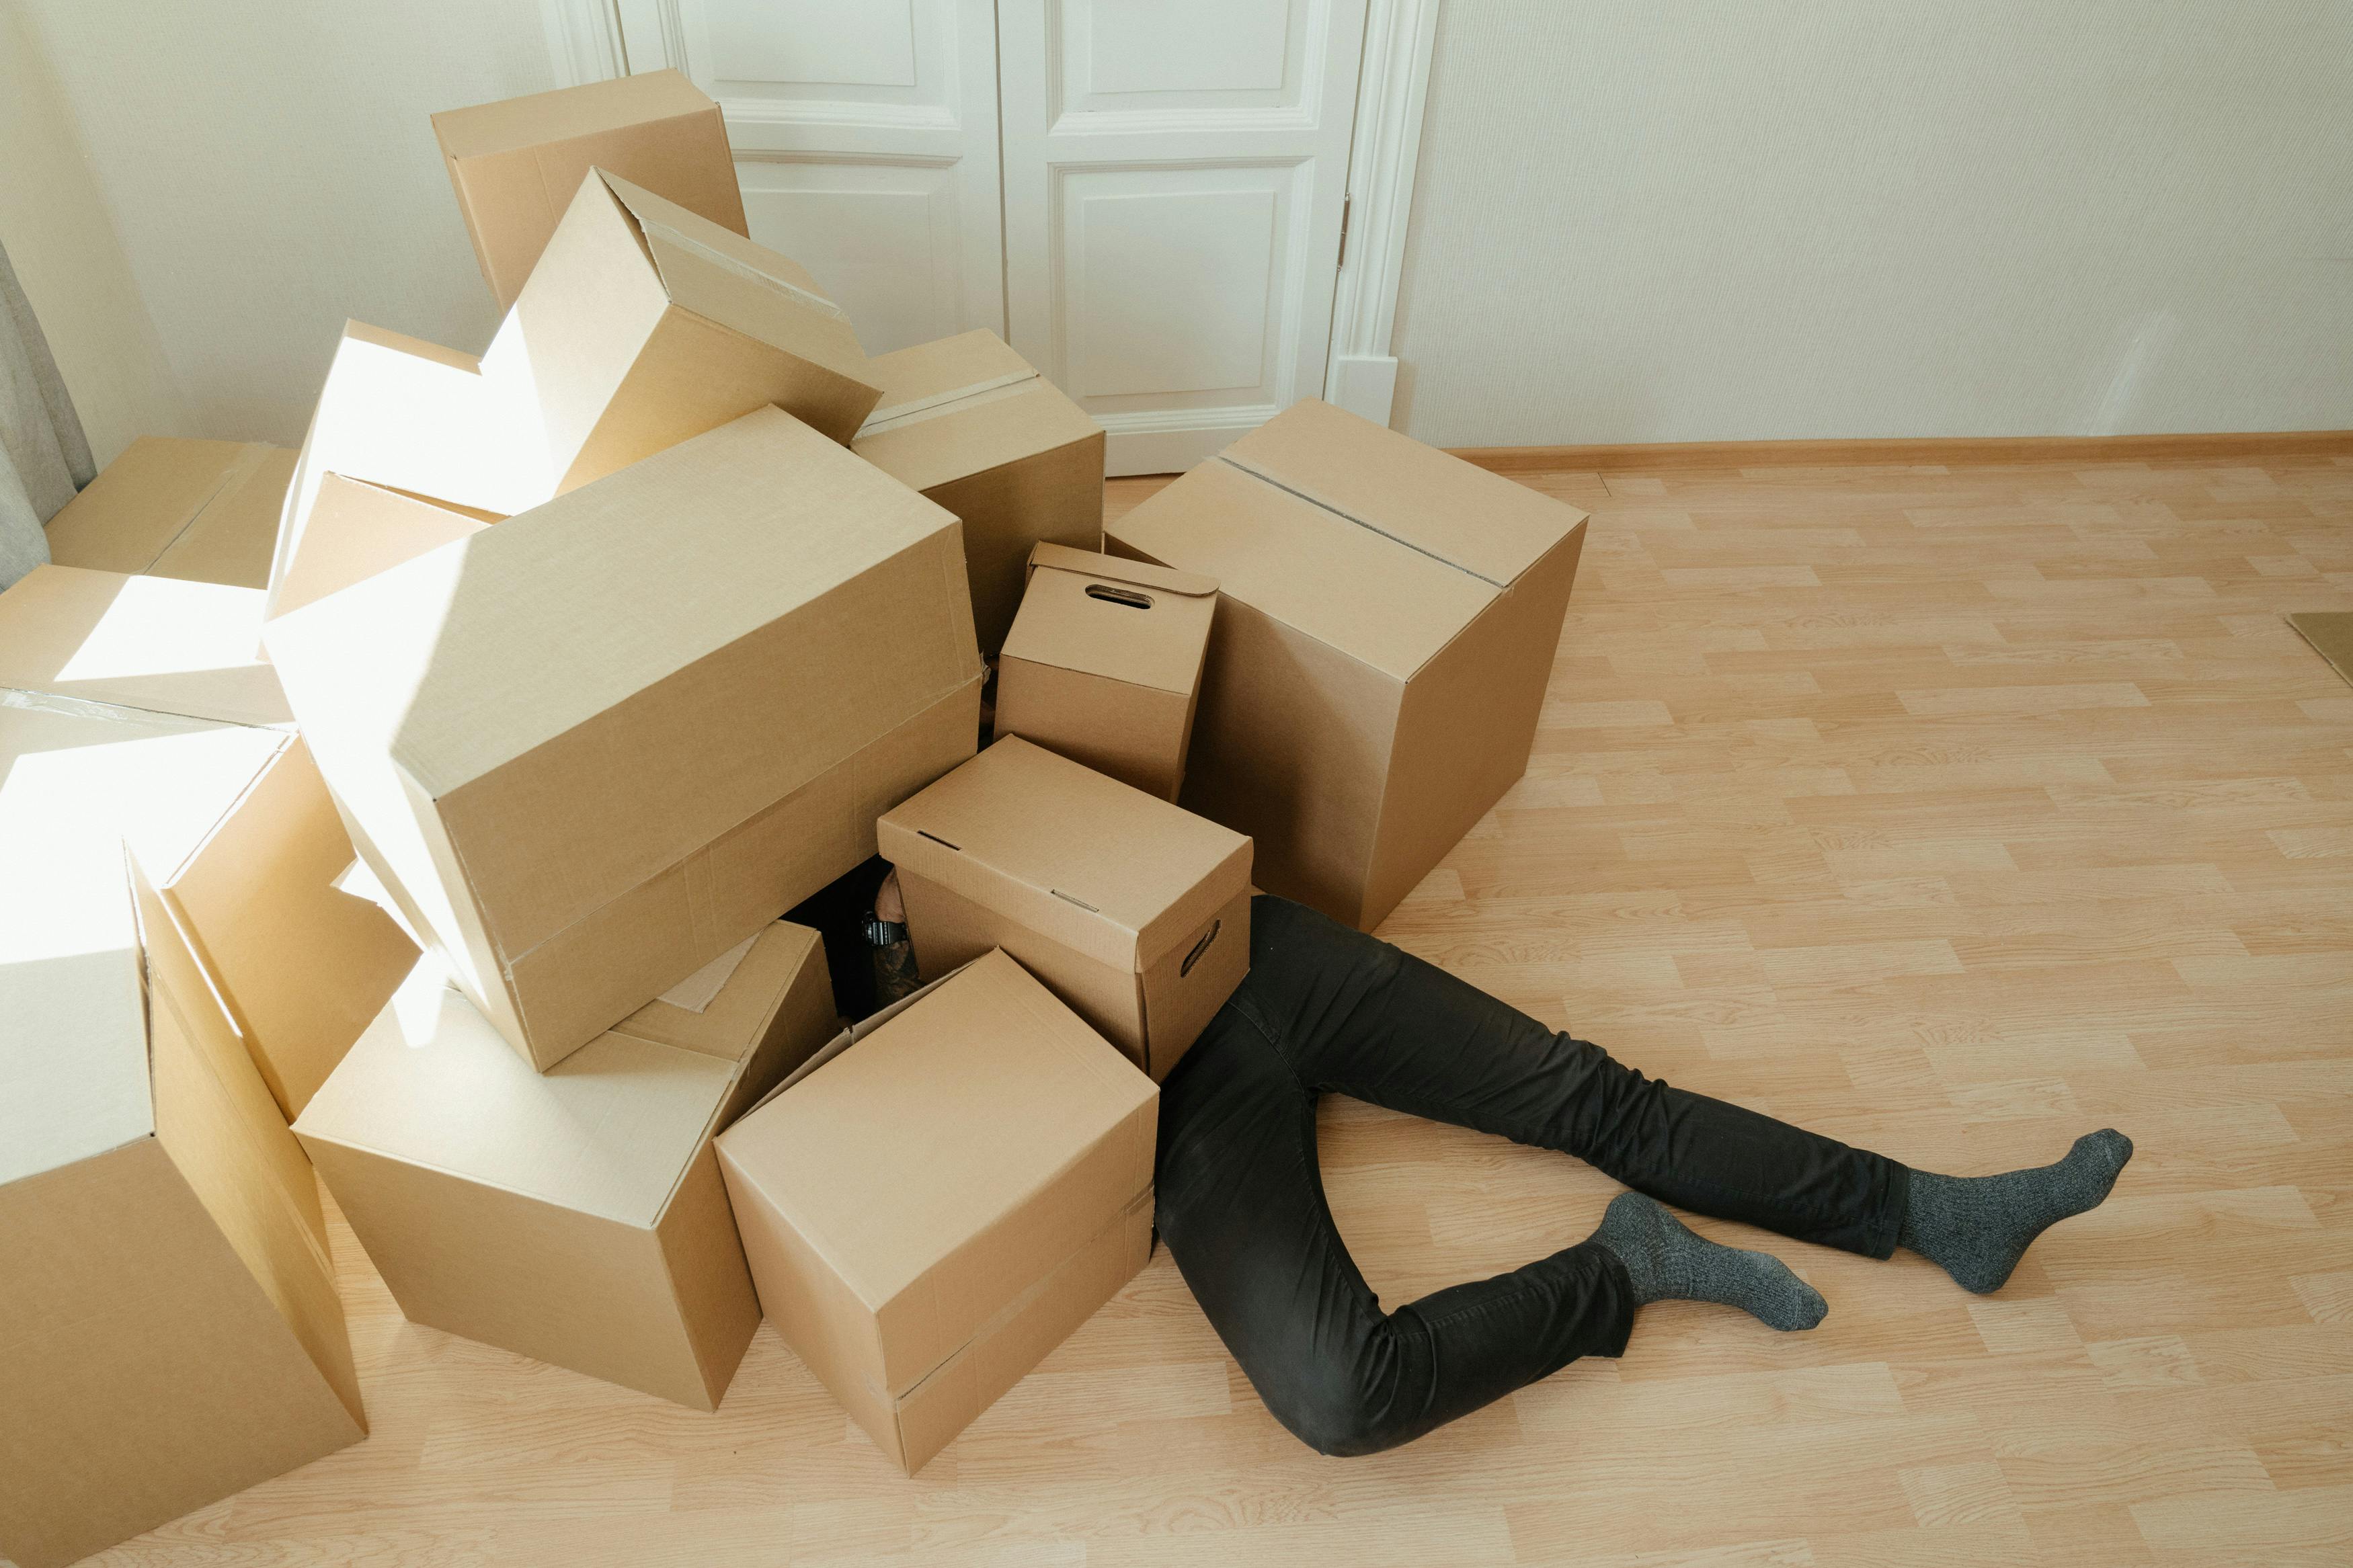 A person overwhelmed by a heap of cardboard boxes while unpacking or packing, symbolizing the importance of learning best practices for organizing Python code with packages and modules for efficient workflow.